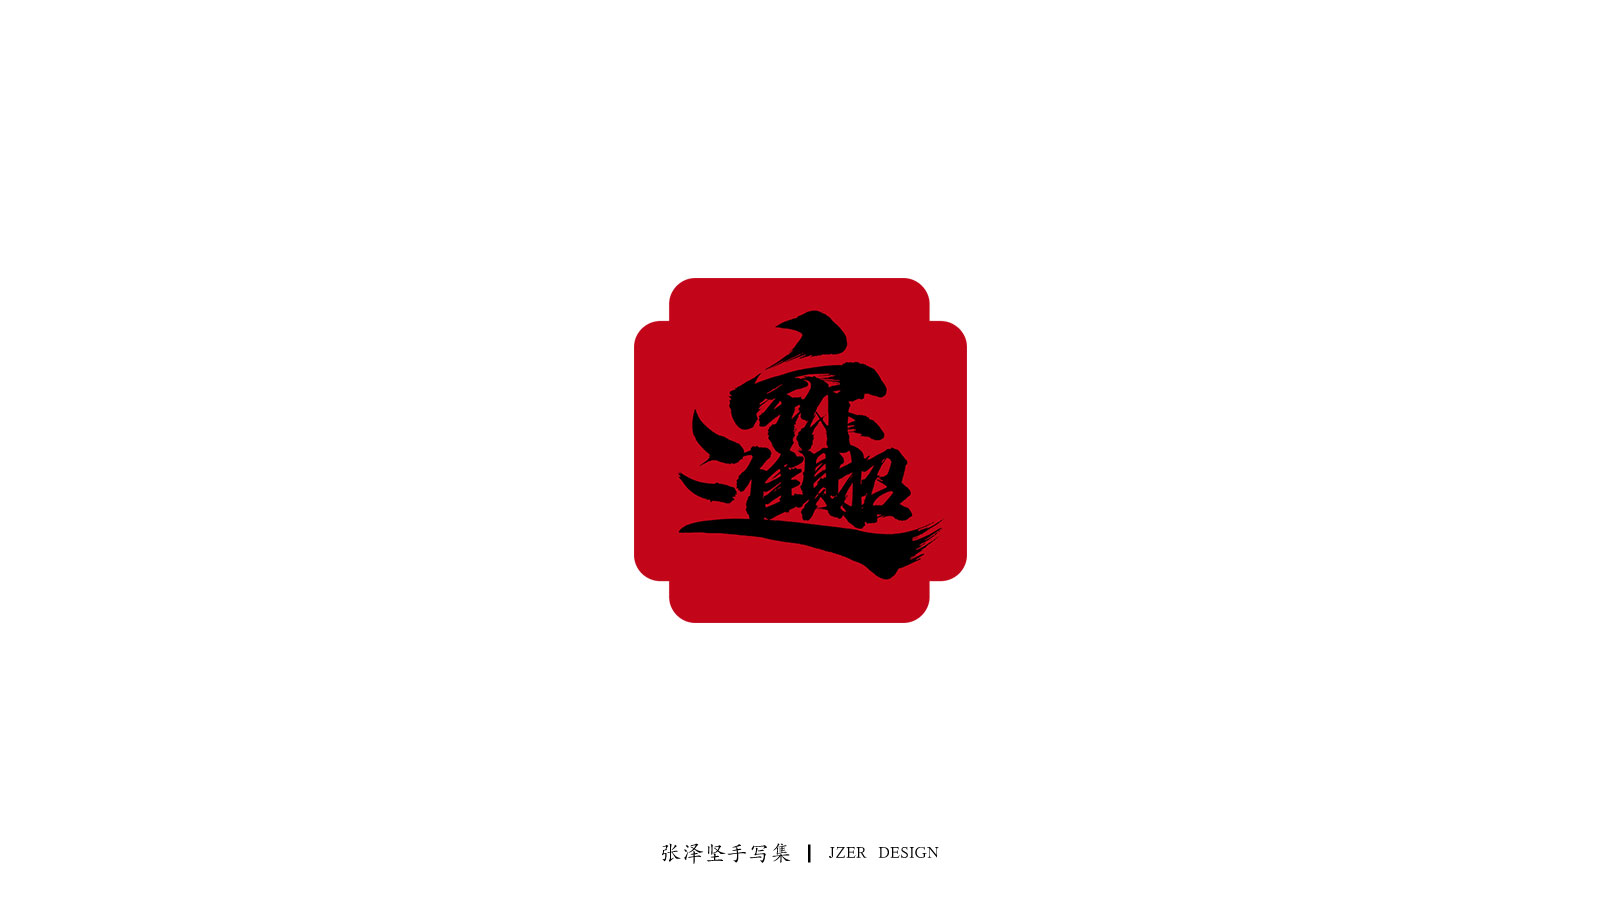 Common New Year greetings in Chinese characters